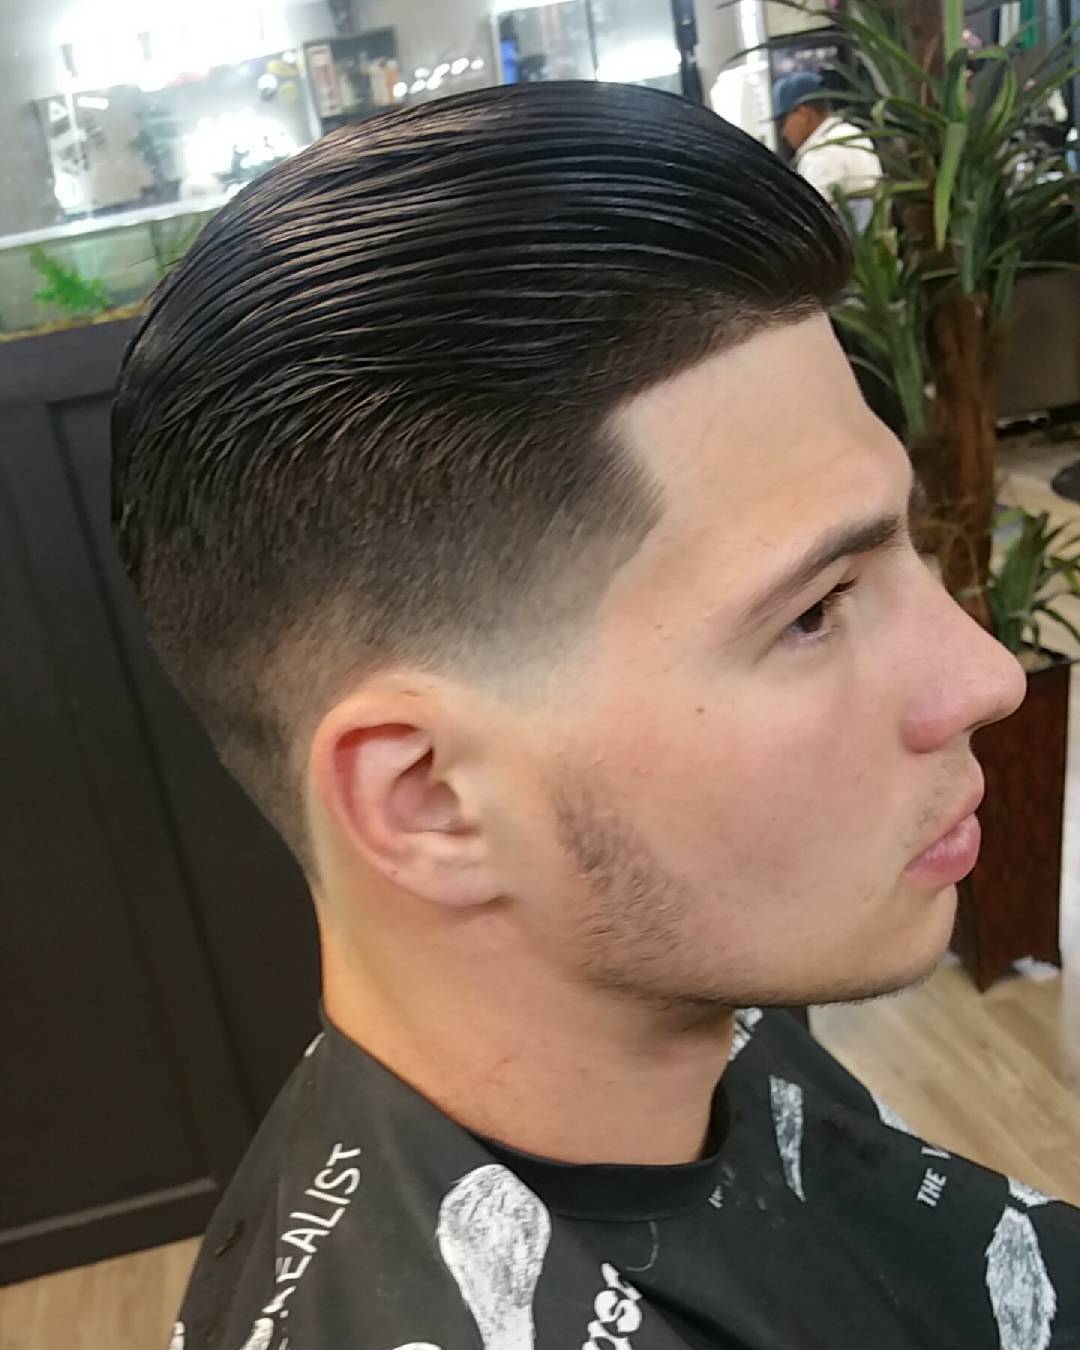 43 Taper Haircut Ideas to Flaunt a Stylish New Look